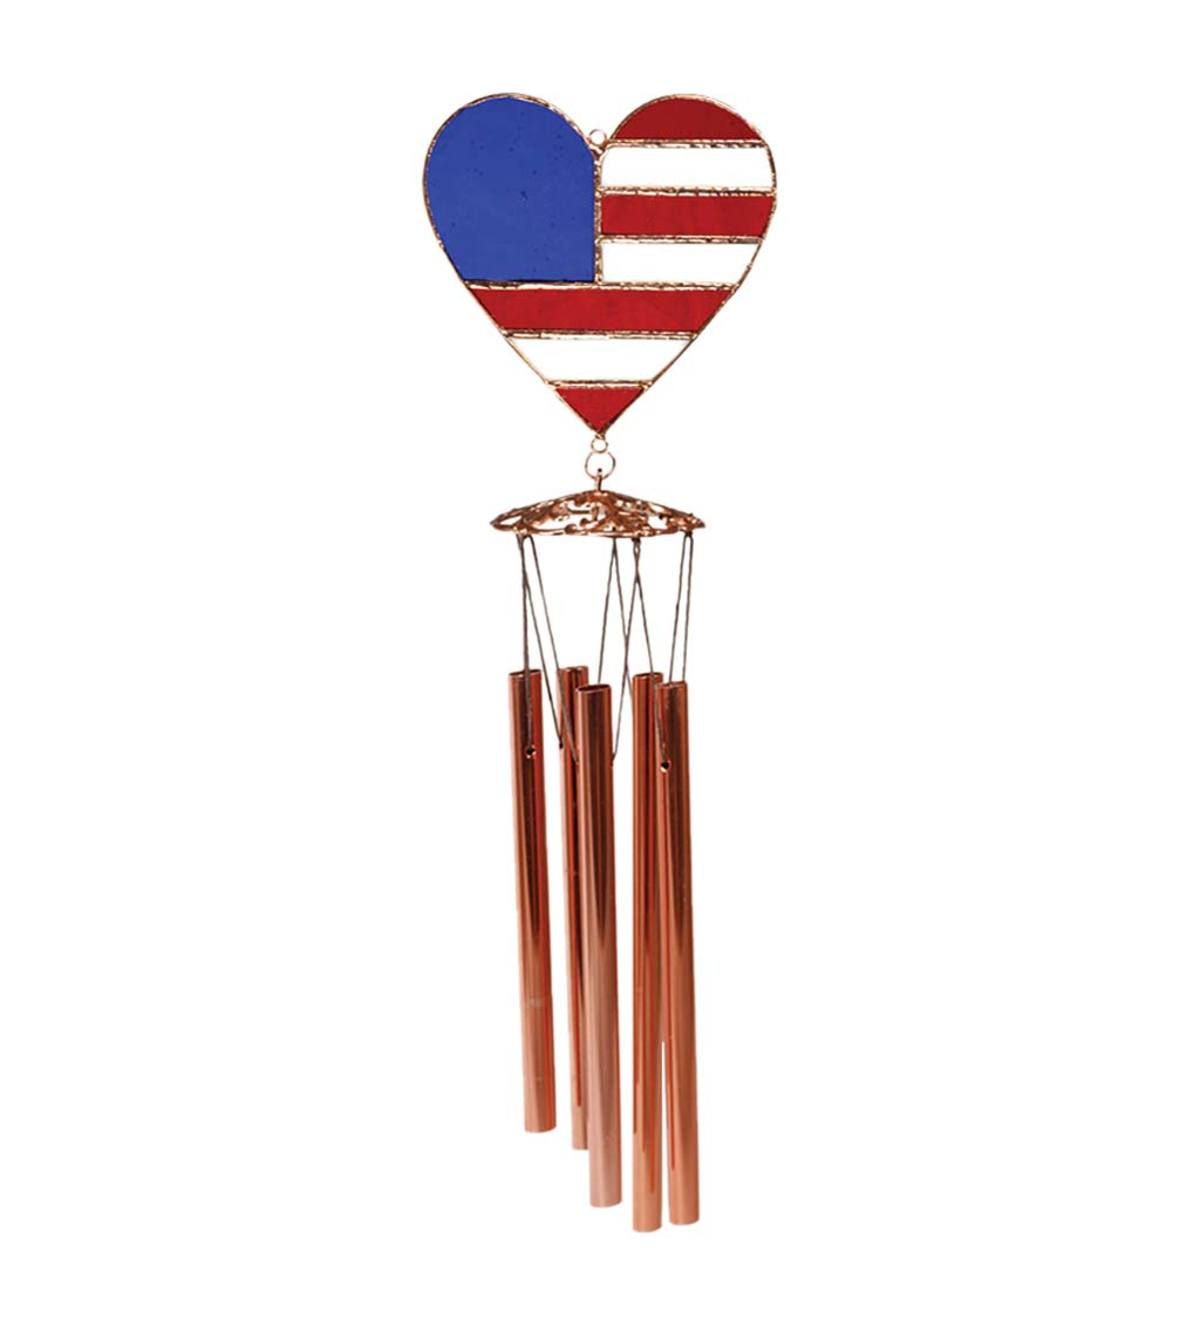 Patriotic Stained Glass and Metal Wind Chime